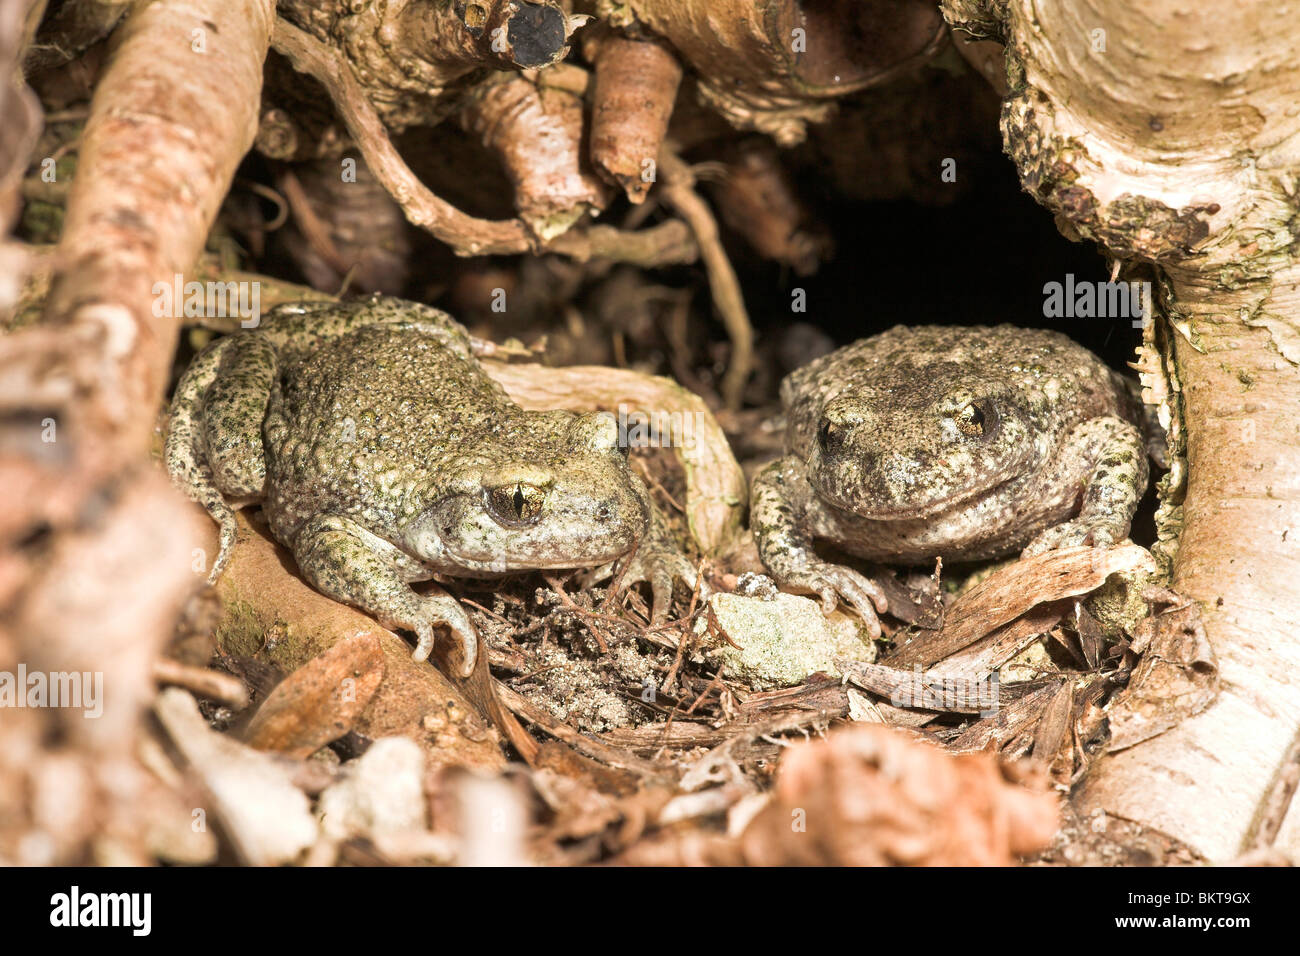 photo of two midwife toads hidden in a hole between tree roots Stock Photo